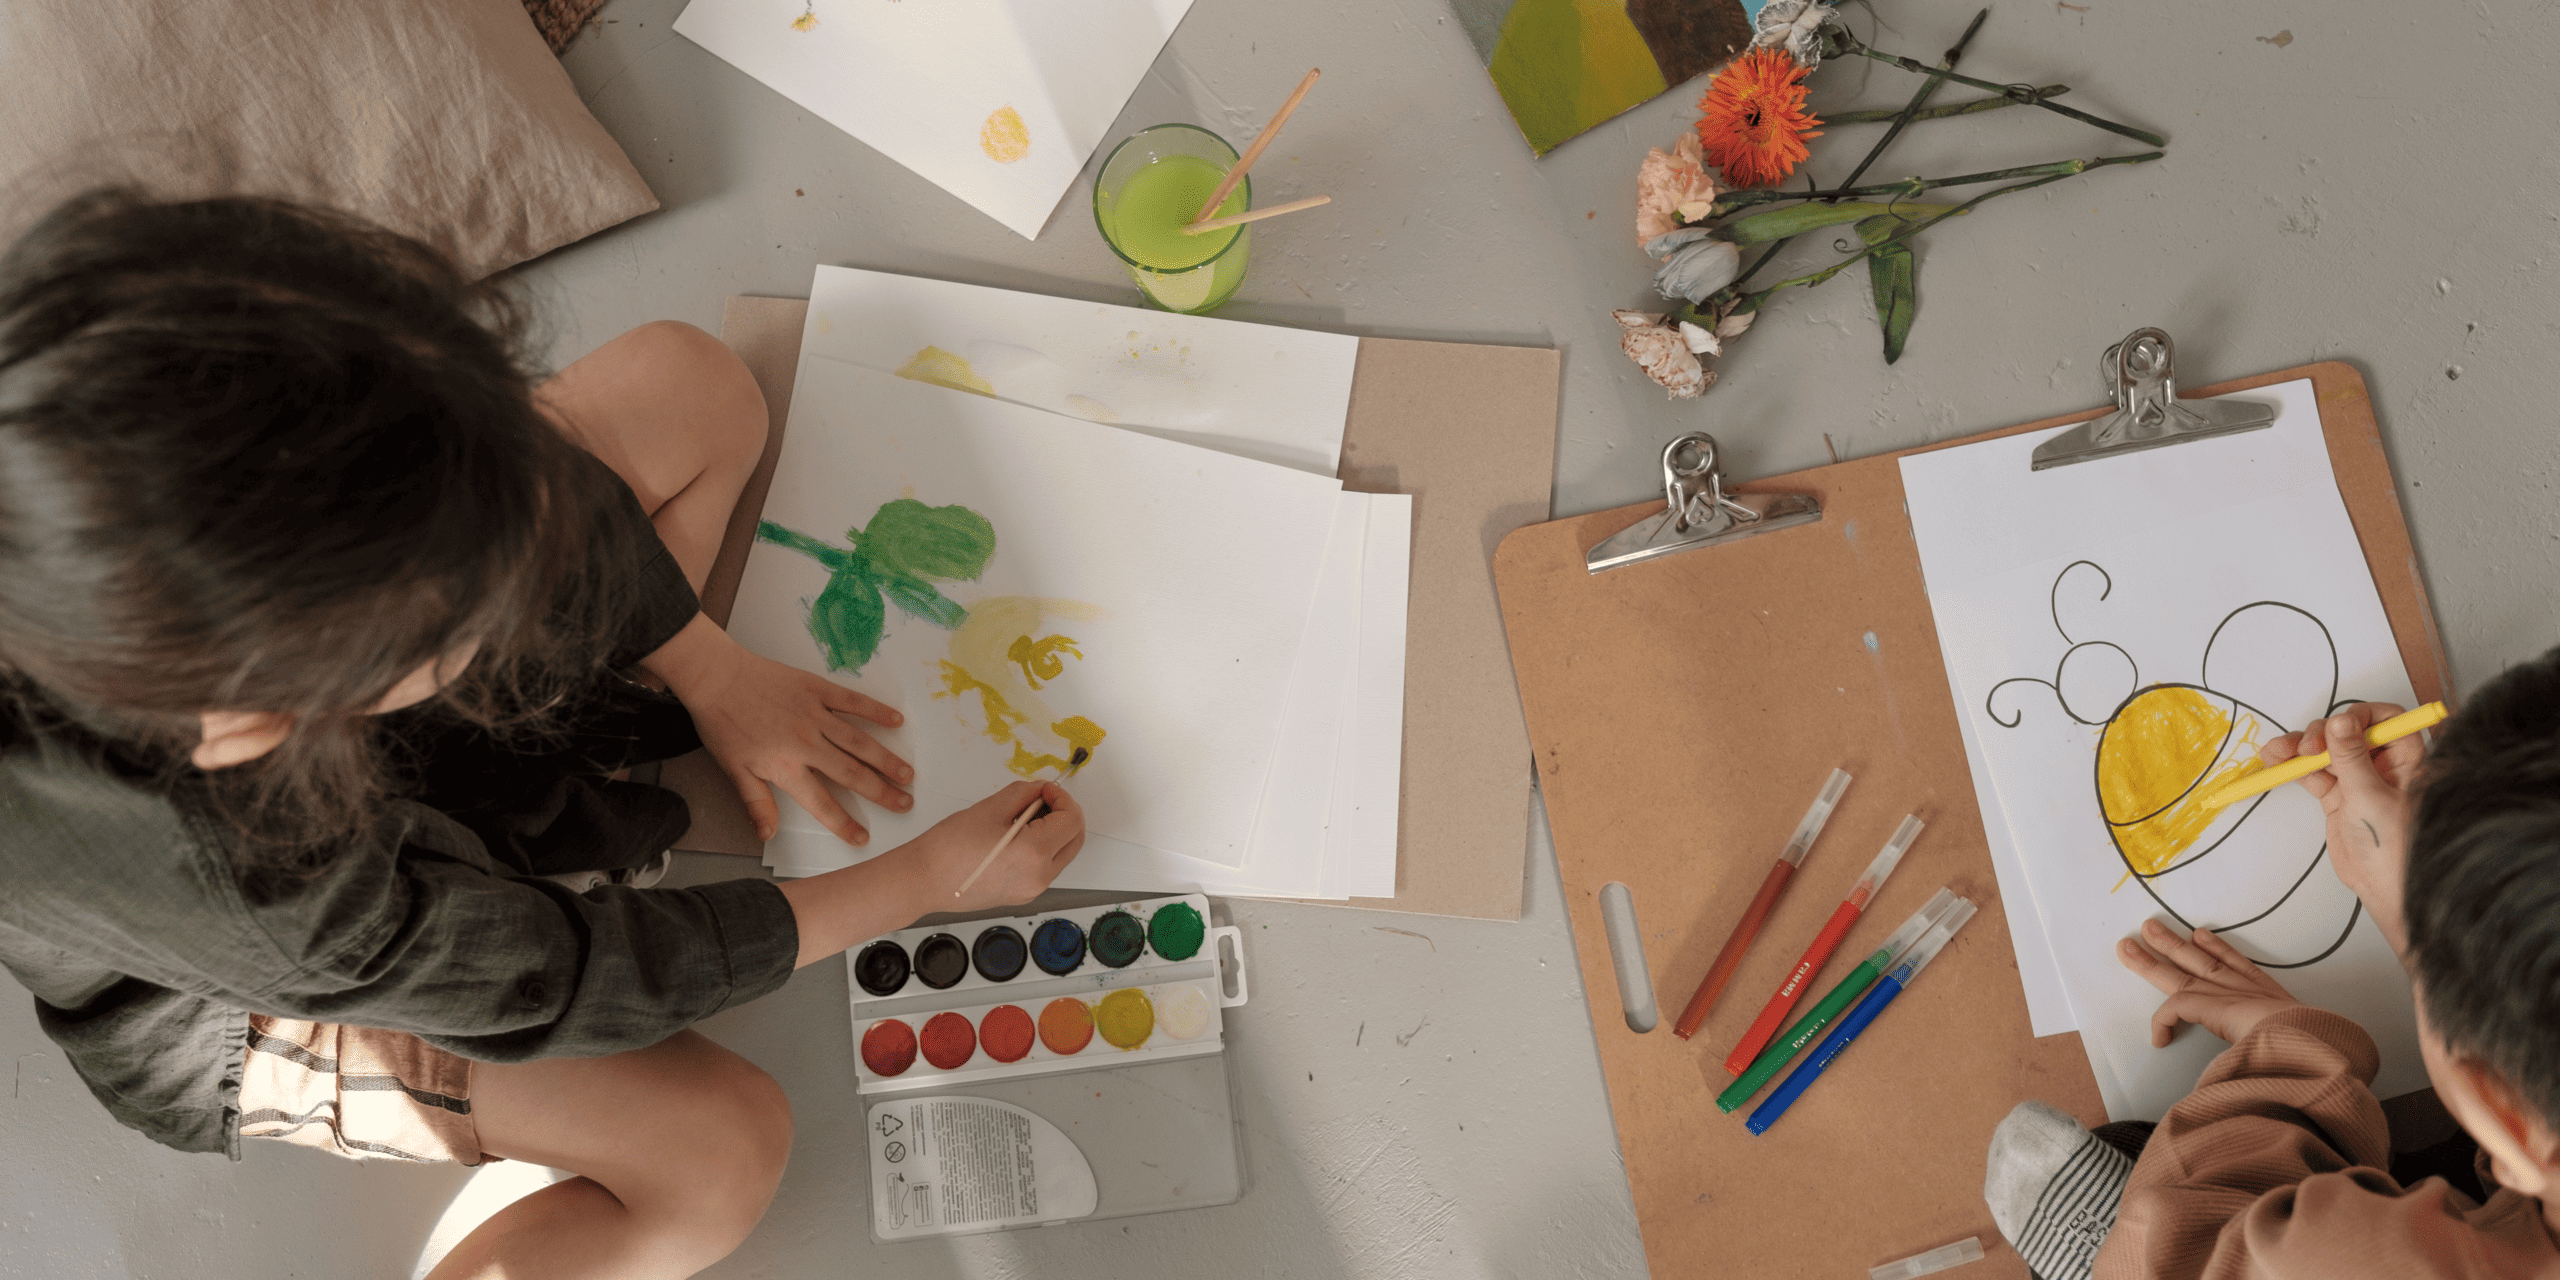 Arts and Crafts with Your Kids Fosters Creativity, Bonding, Fun